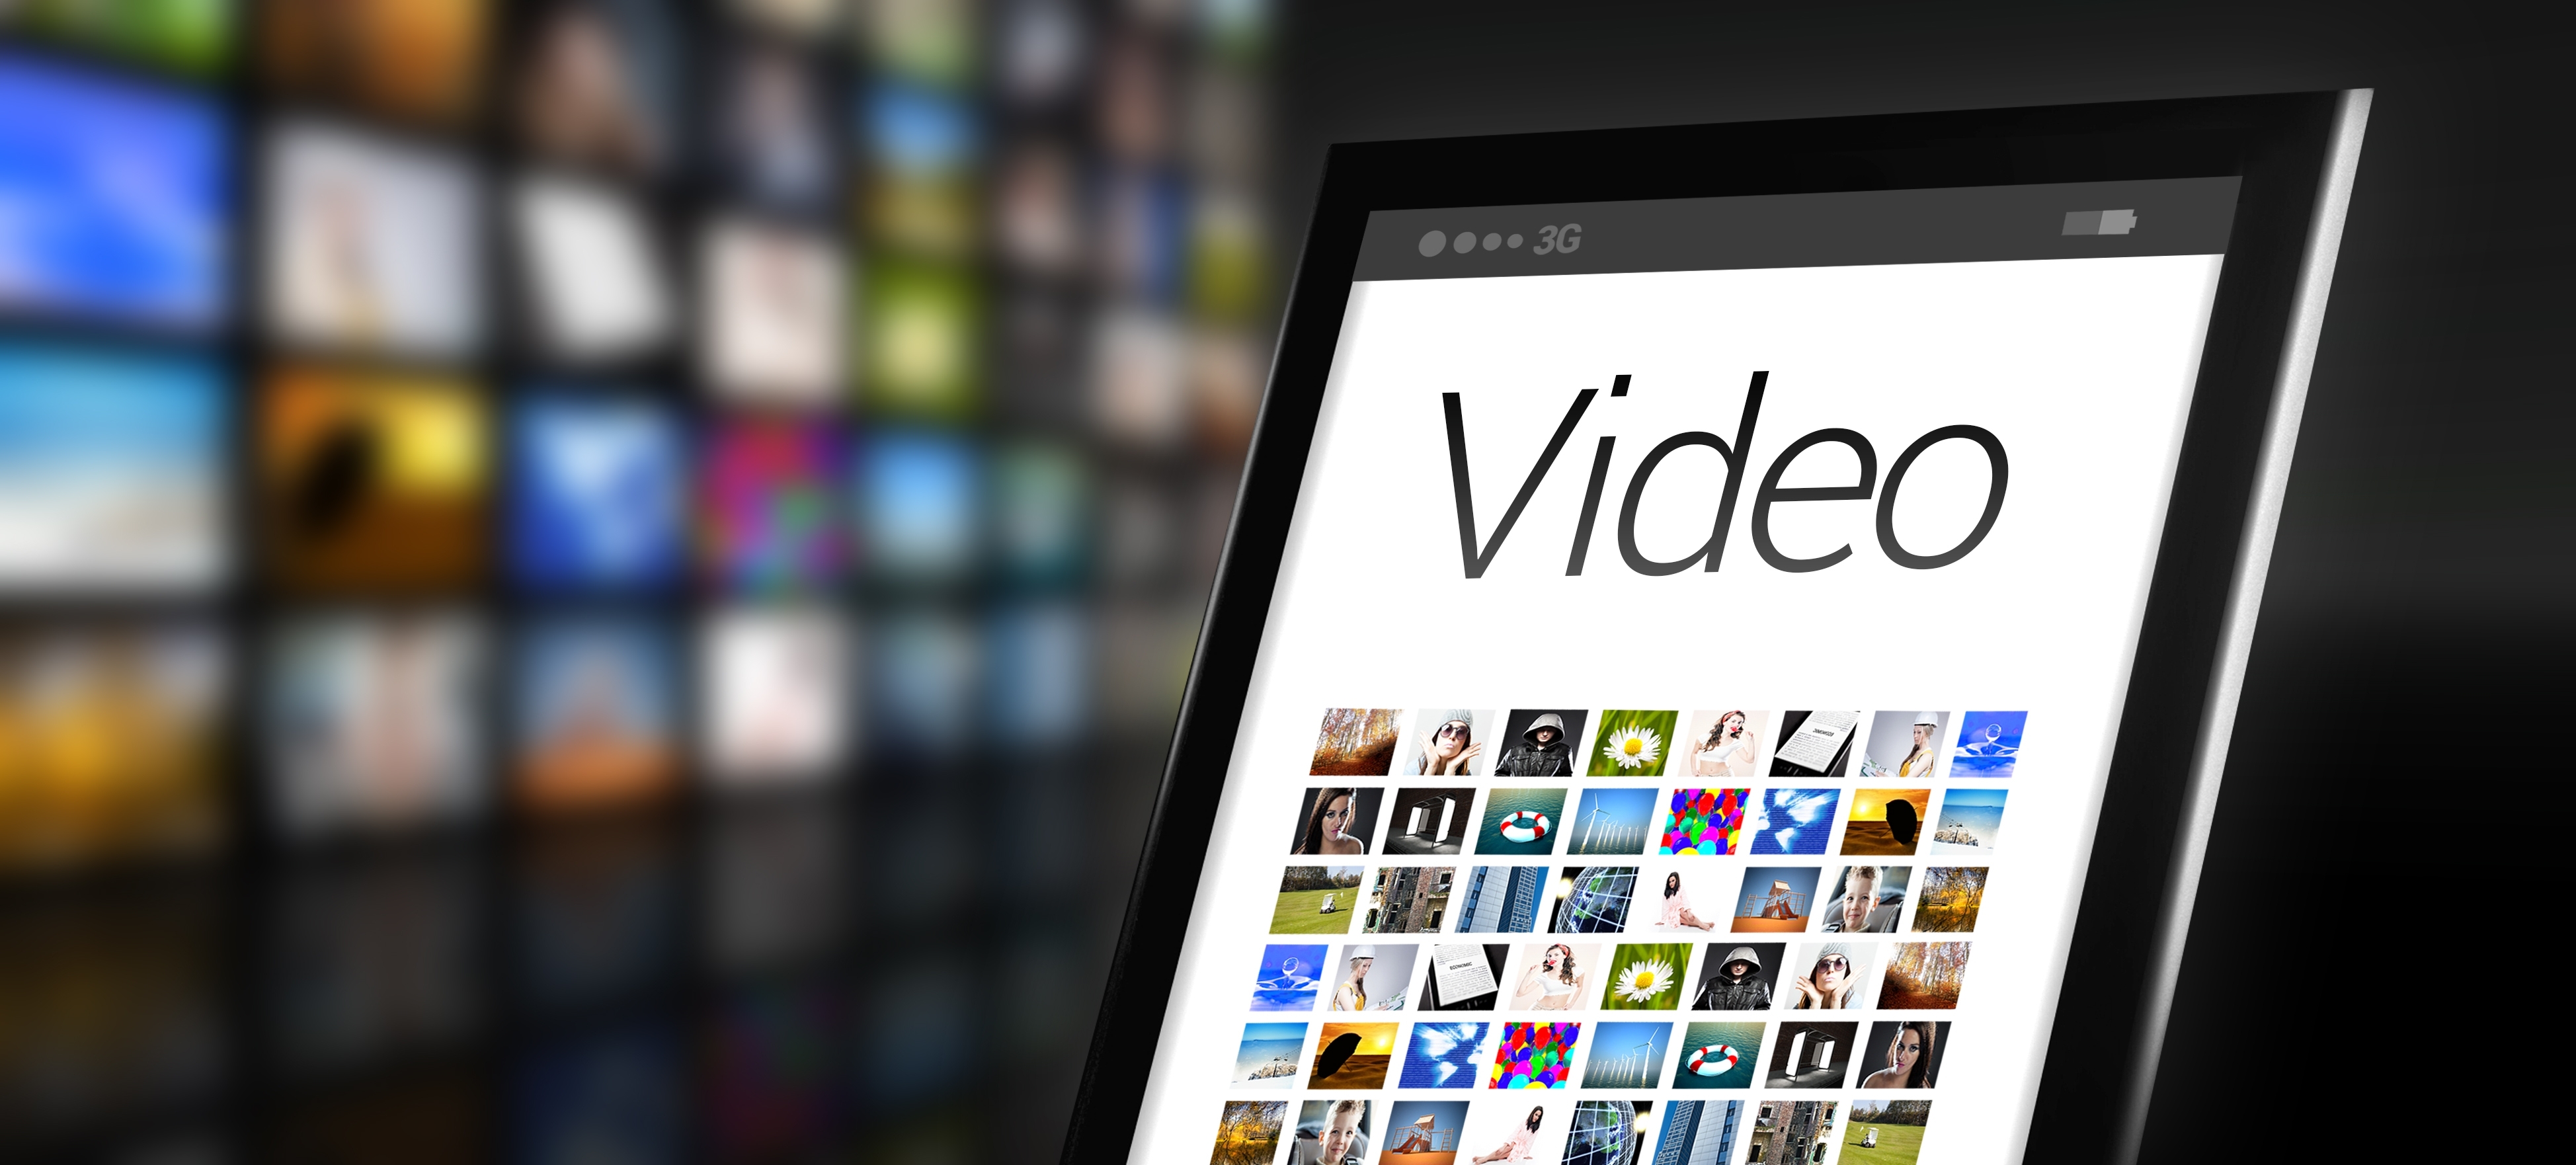 7 Tips For Adding Video to Your Digital Marketing Strategy